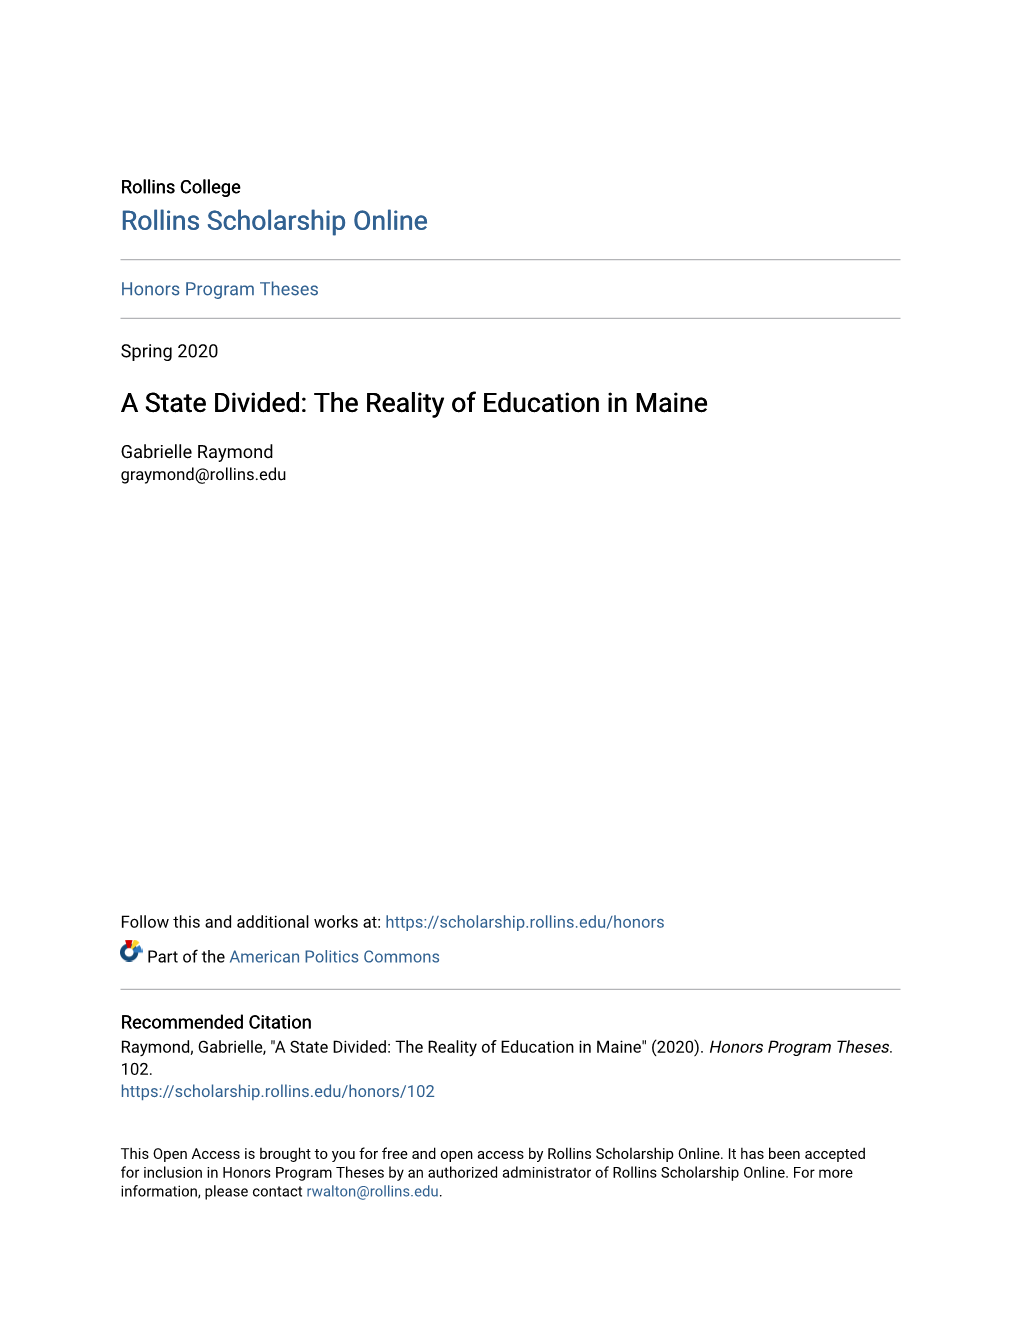 A State Divided: the Reality of Education in Maine